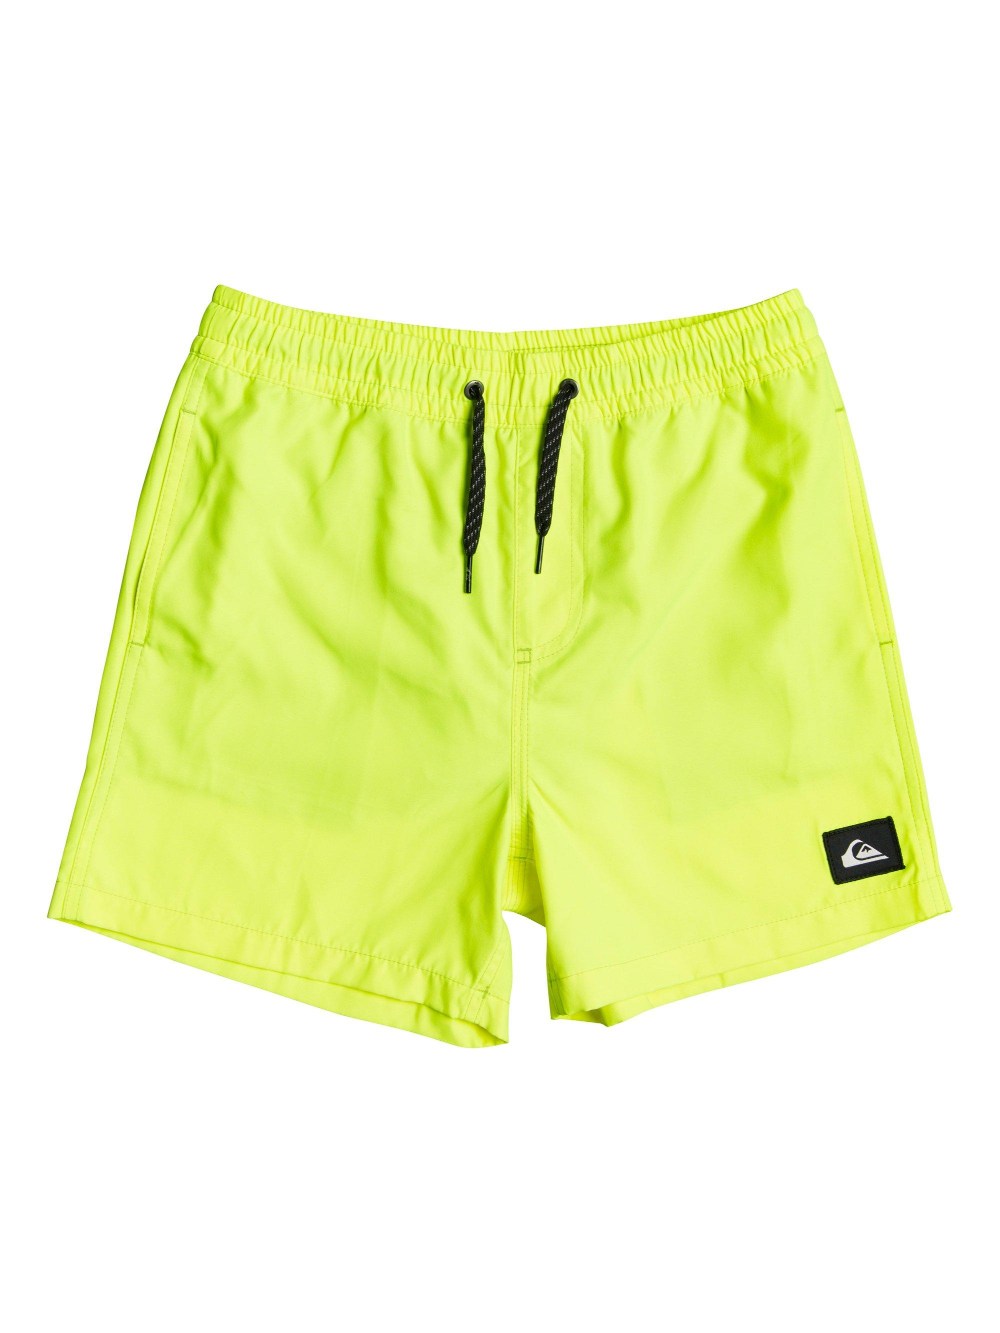 BAADOR EVERYDAY VOLLEY YOUTH 13 POLYESTER SAFETY YELLOW